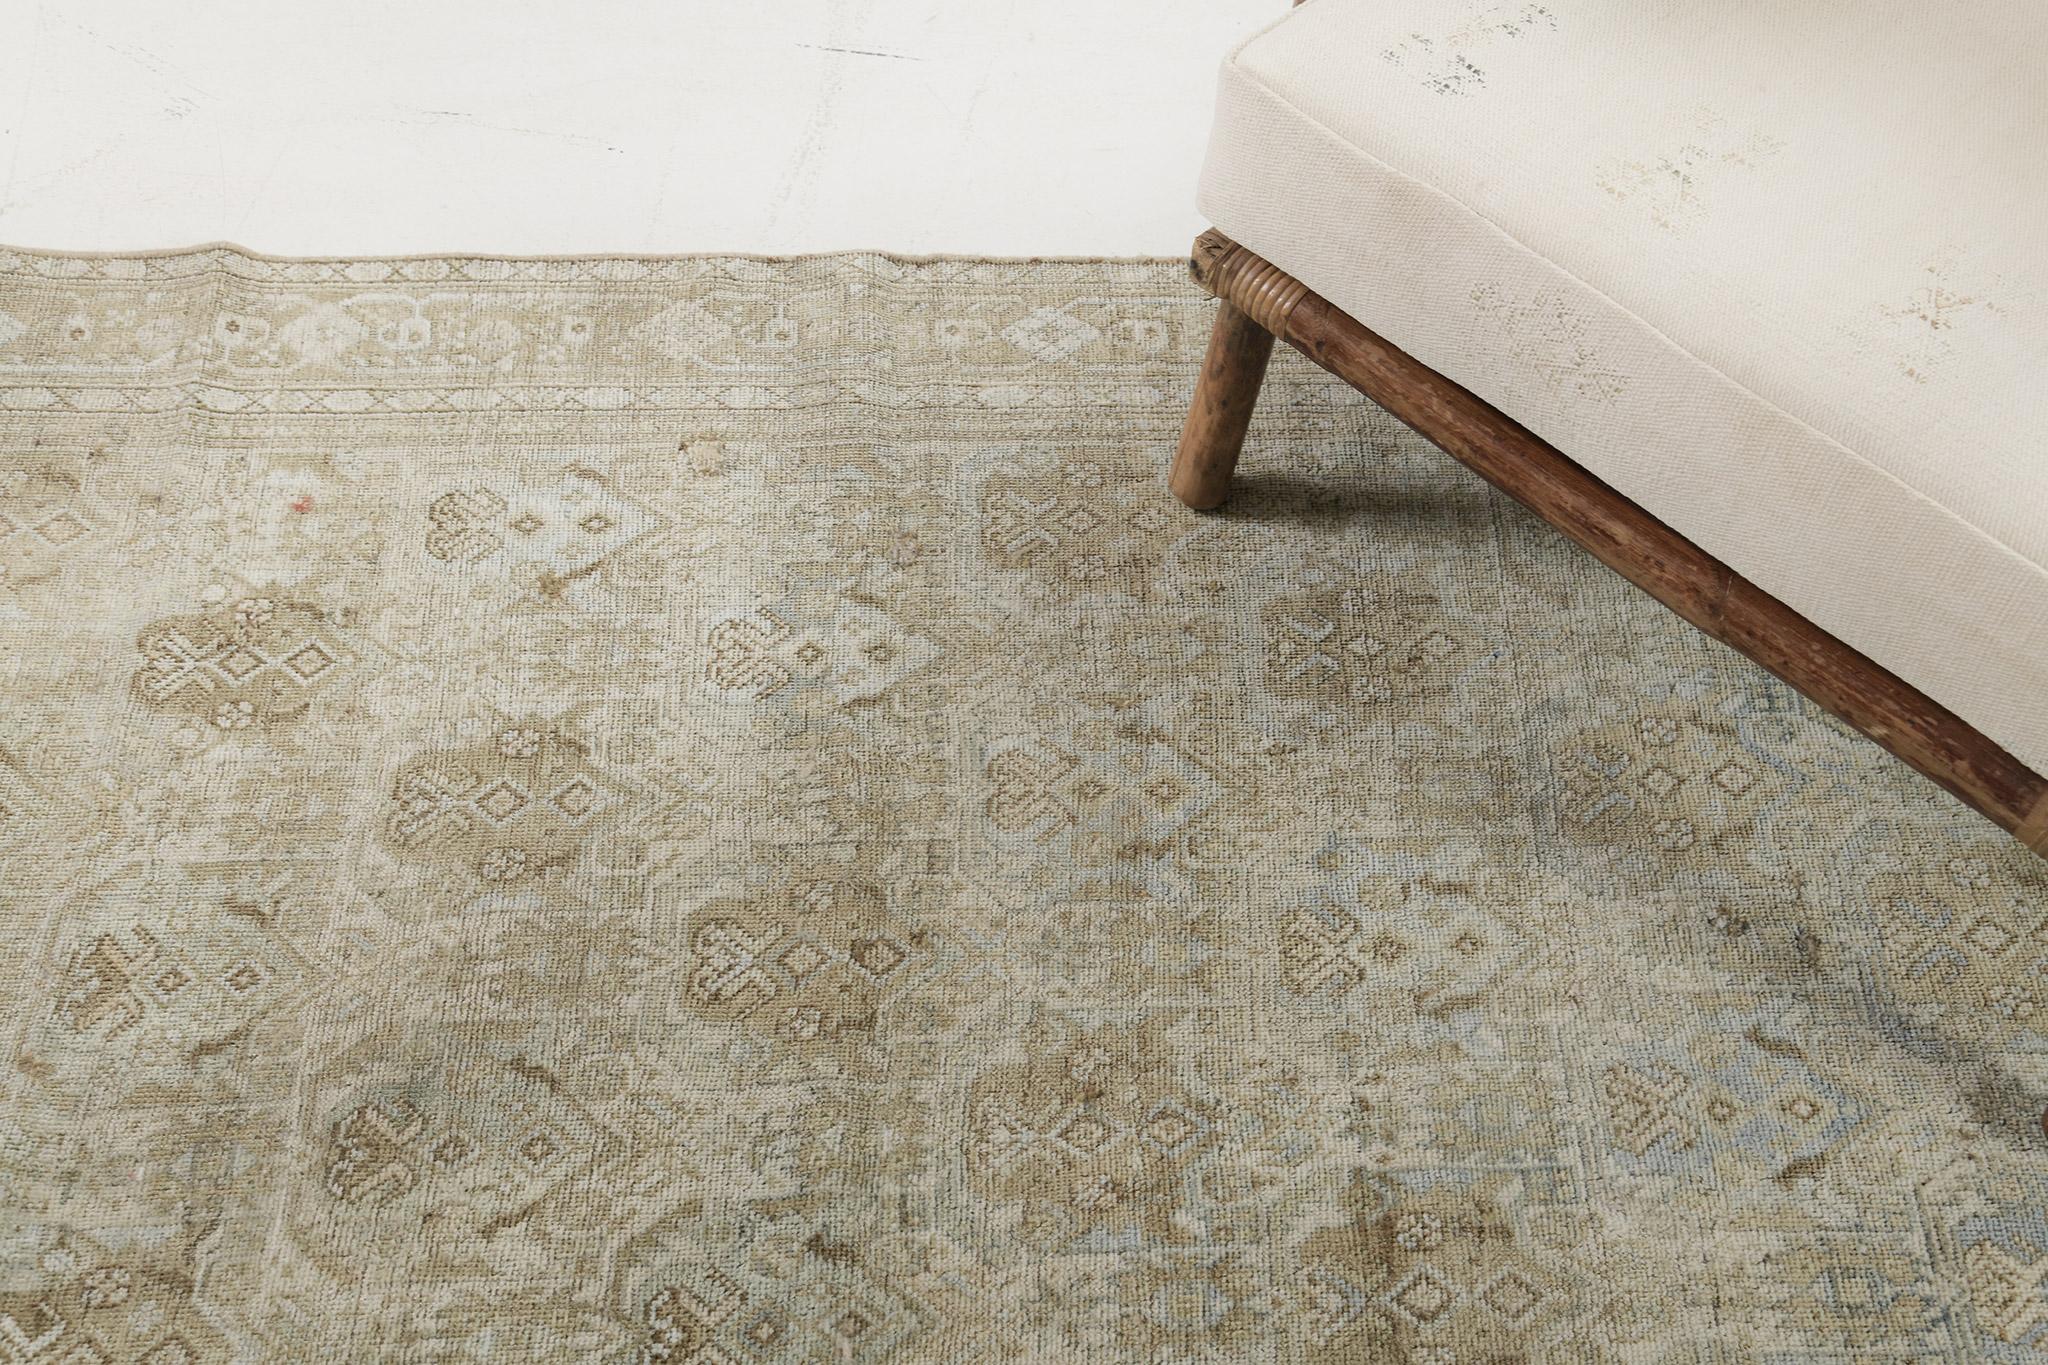 This rug features bold, beautiful styling that is easily recognizable in the marketplace of rugs. It features darker brown and turquoise colors in contrast to the typical bright reds of most Vintage Persian Shiraz Rugs. Therefore this rugs distinct